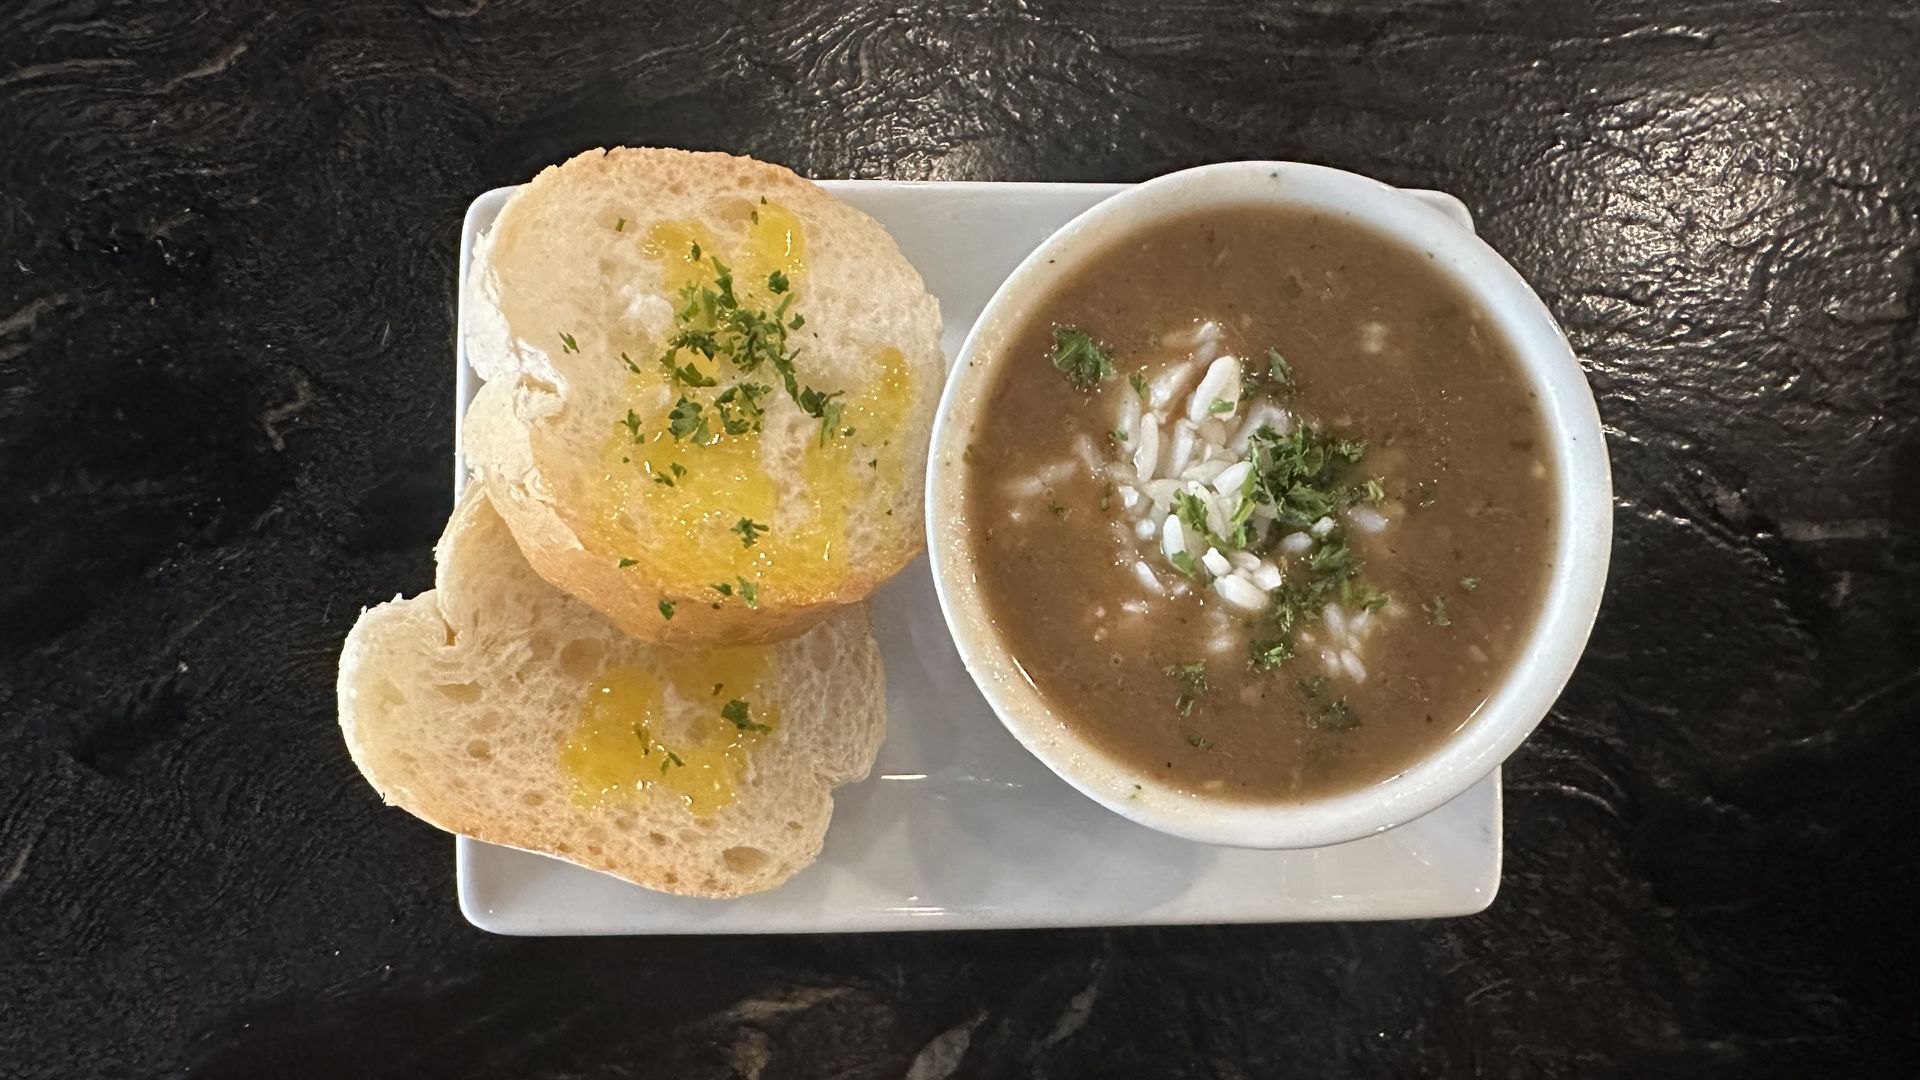 A cup of gumbo sits on a dark stone countertop on top of a rectangle plate. The plate also has two bread rounds.